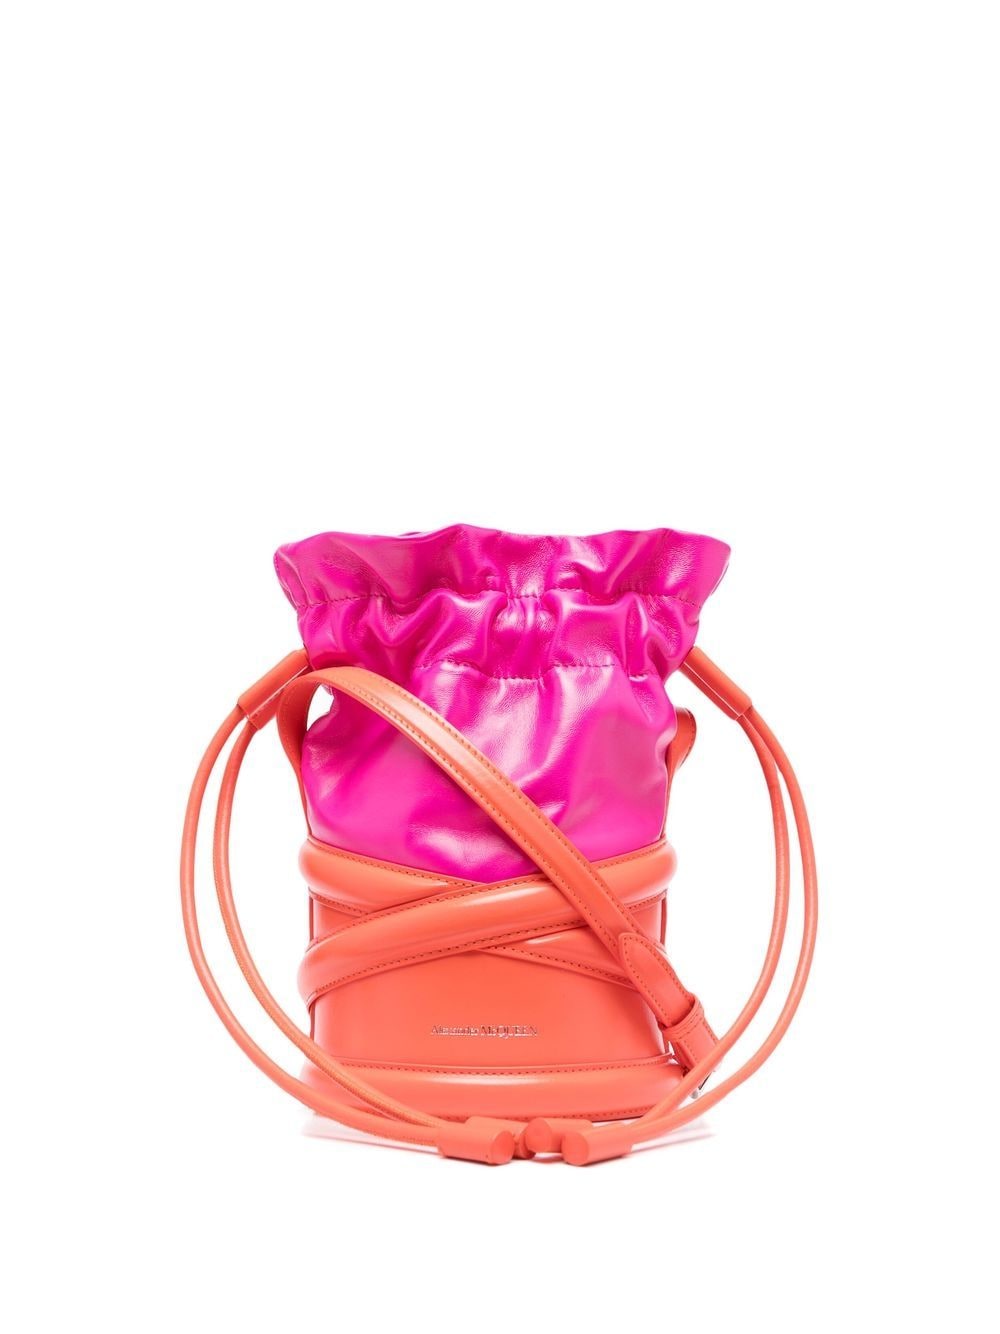 Alexander McQueen The Soft Curve two-tone bag - Pink